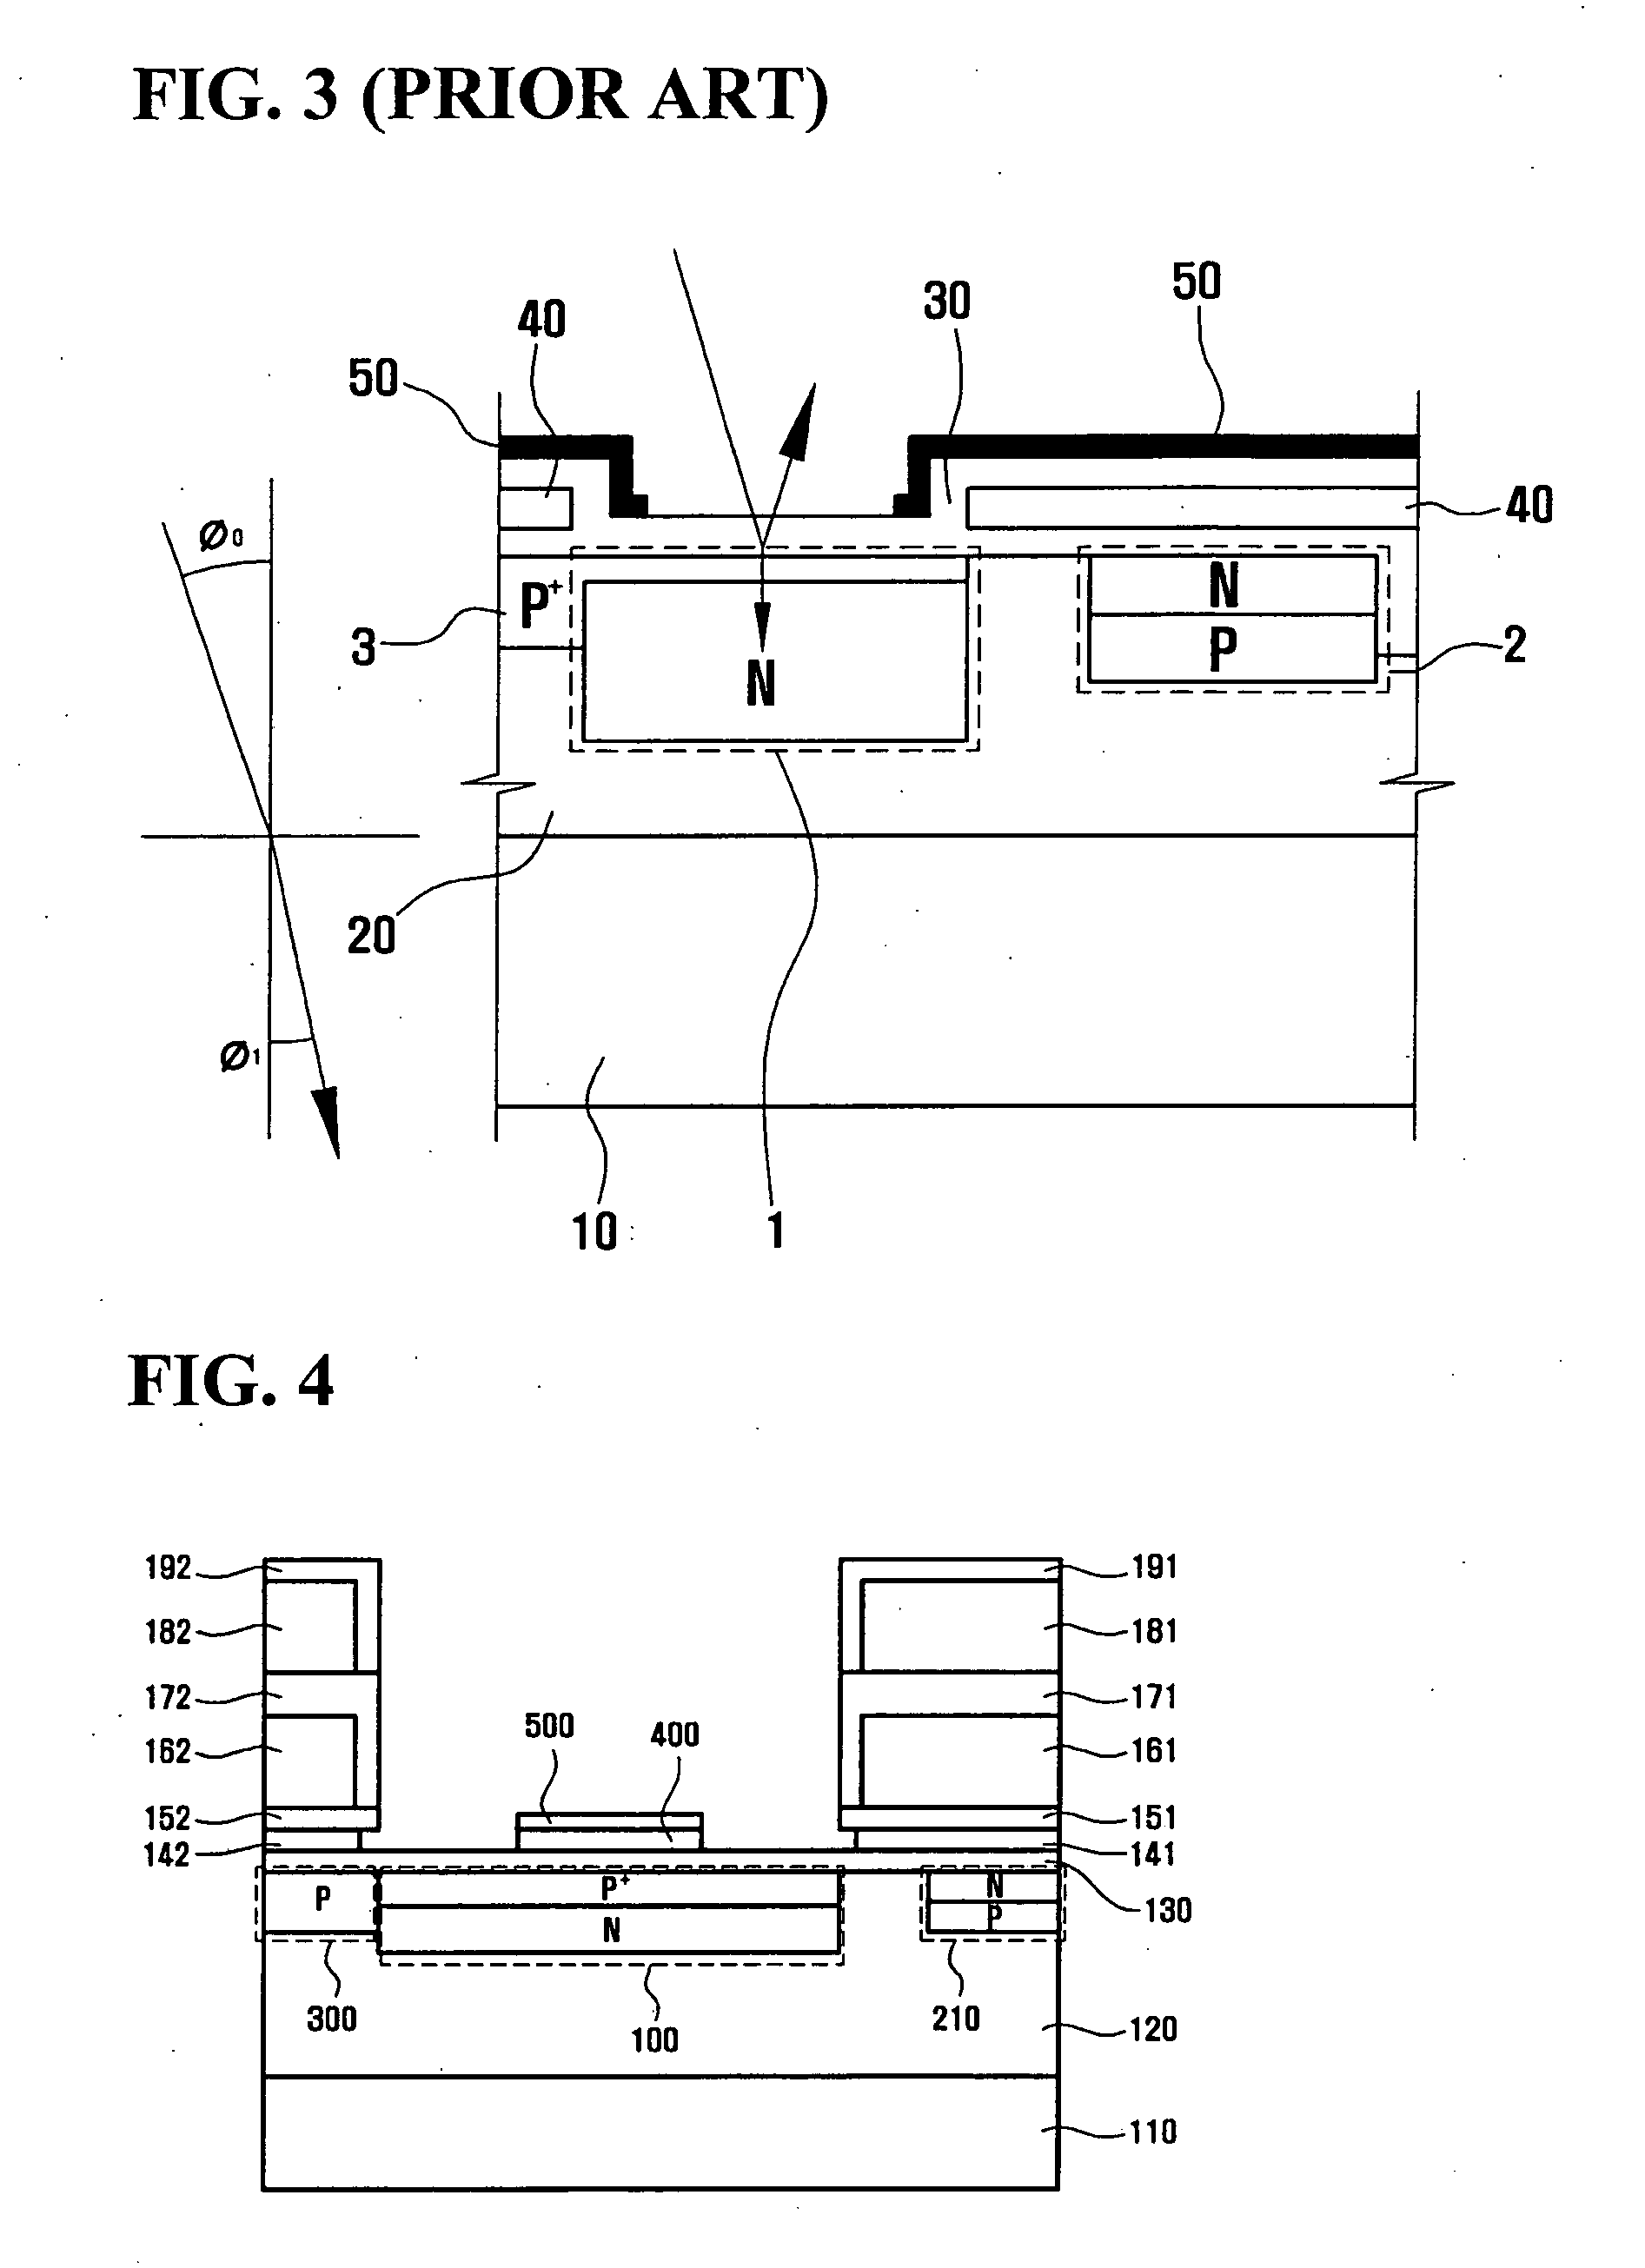 Solid-state imaging apparatus having multiple anti-reflective layers and method for fabricating the multiple anti-reflective layers